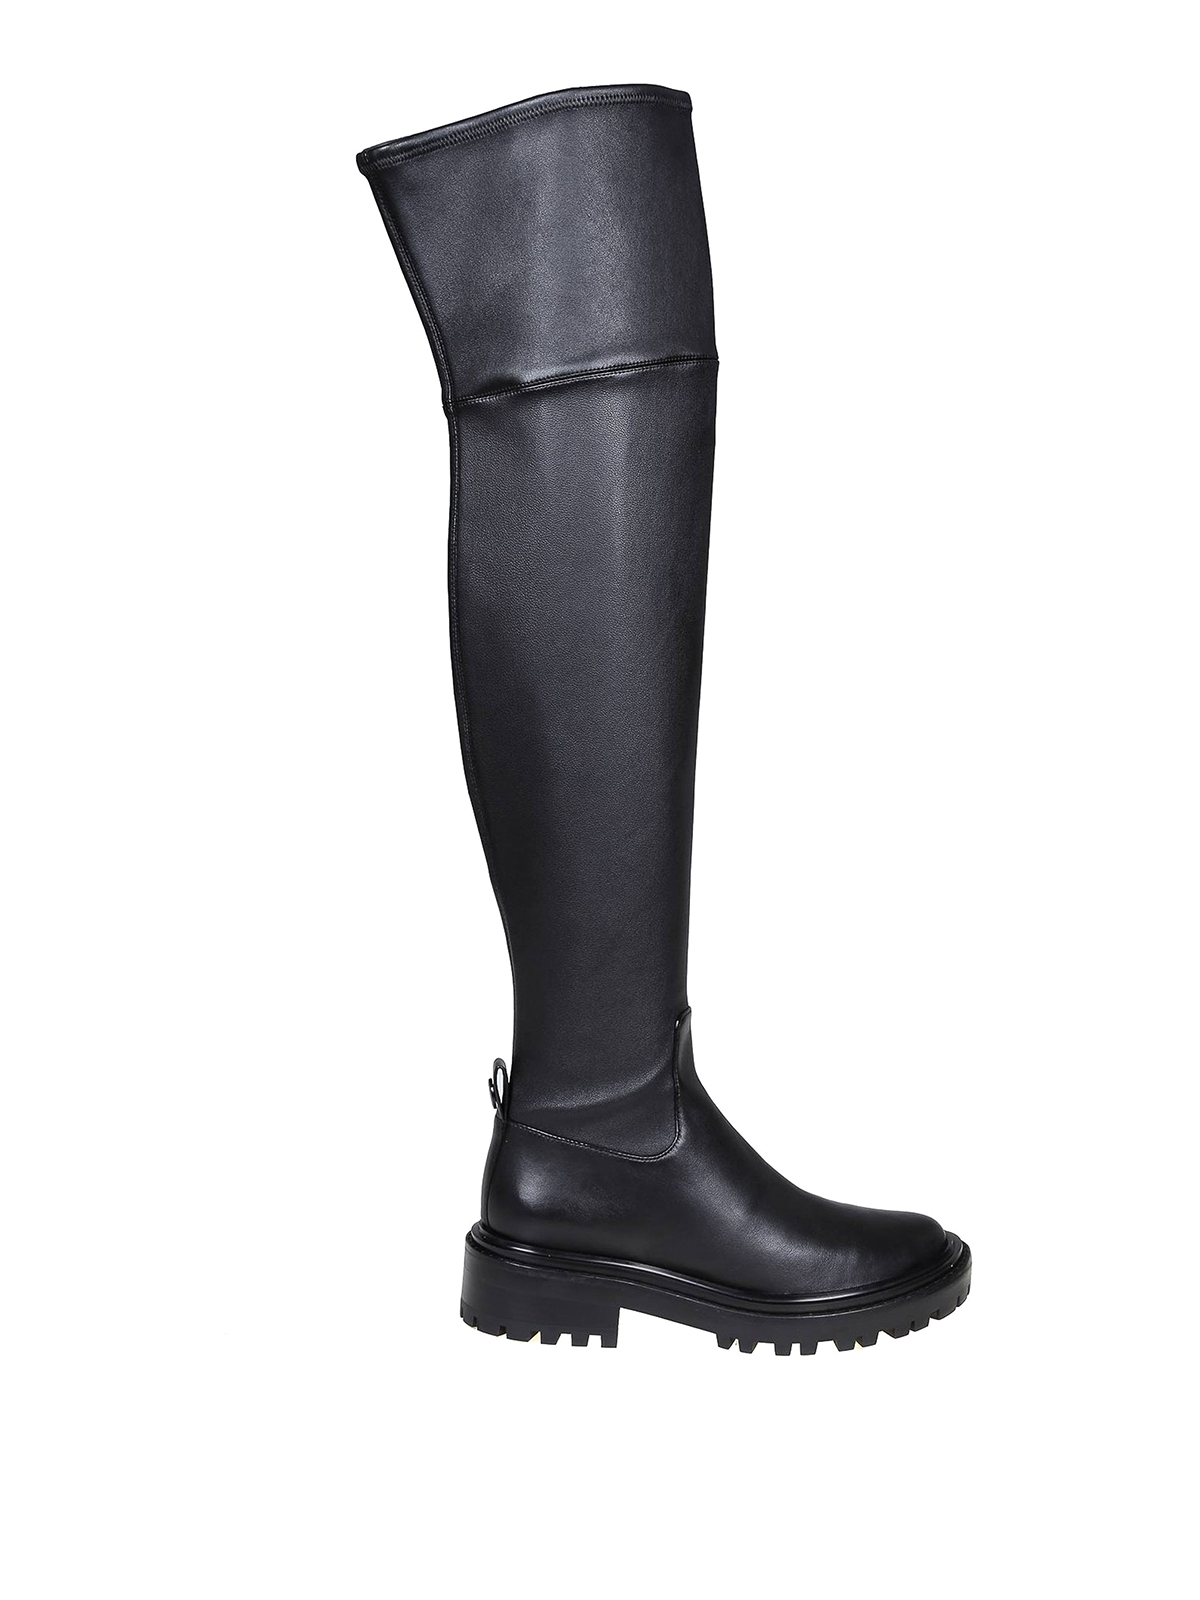 Boots Tory Burch - Leather boots - 137660006 | Shop online at iKRIX